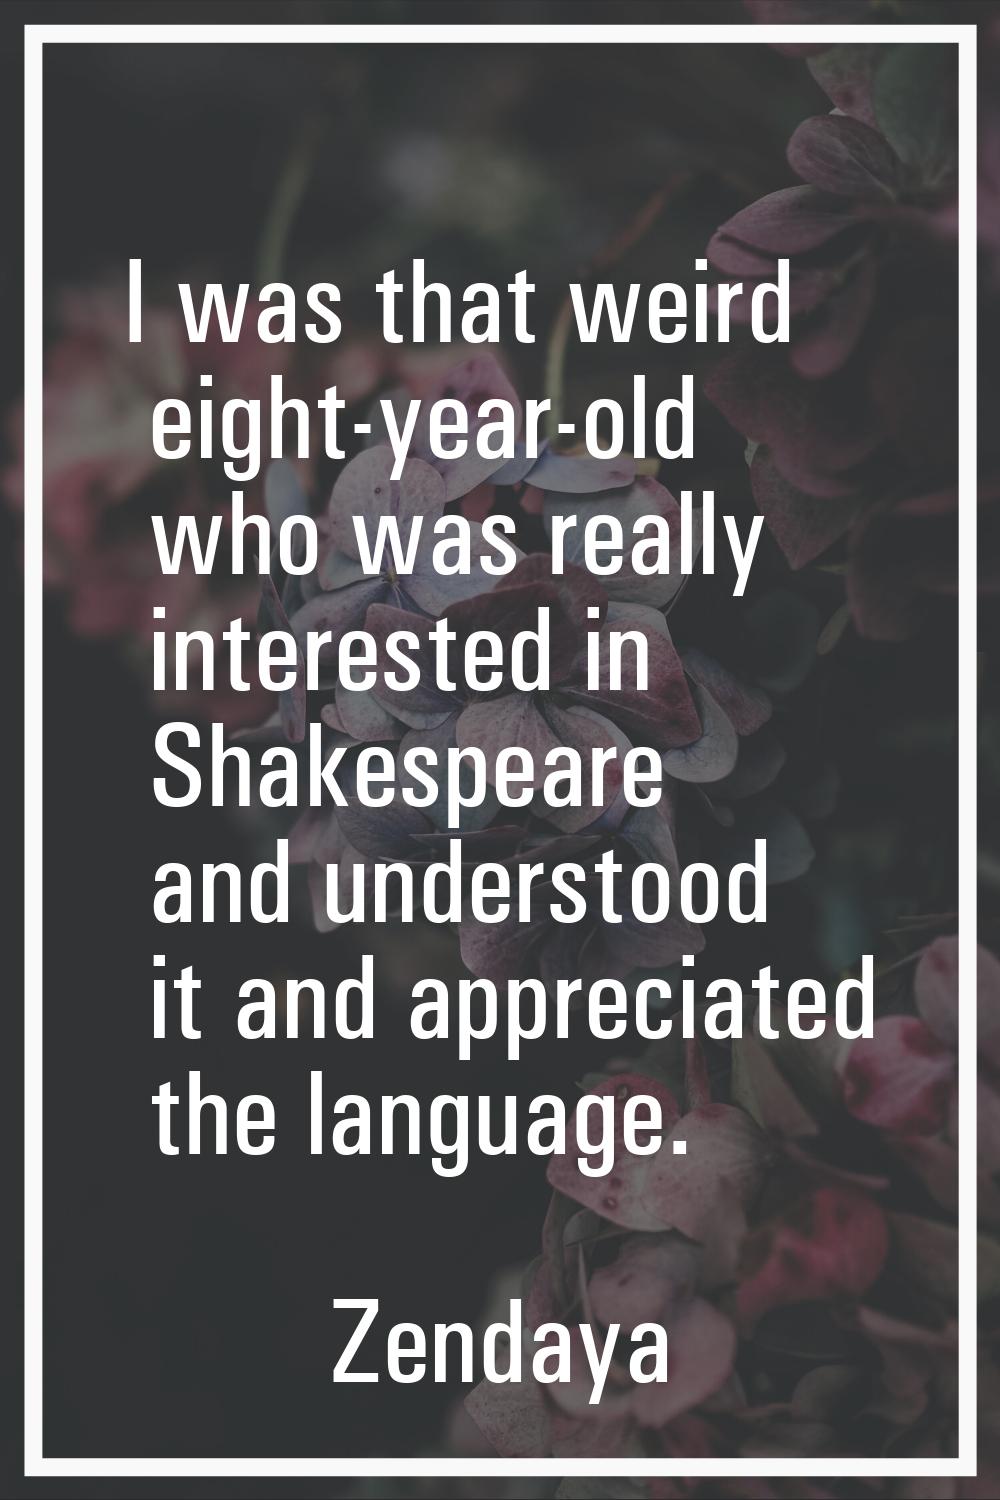 I was that weird eight-year-old who was really interested in Shakespeare and understood it and appr